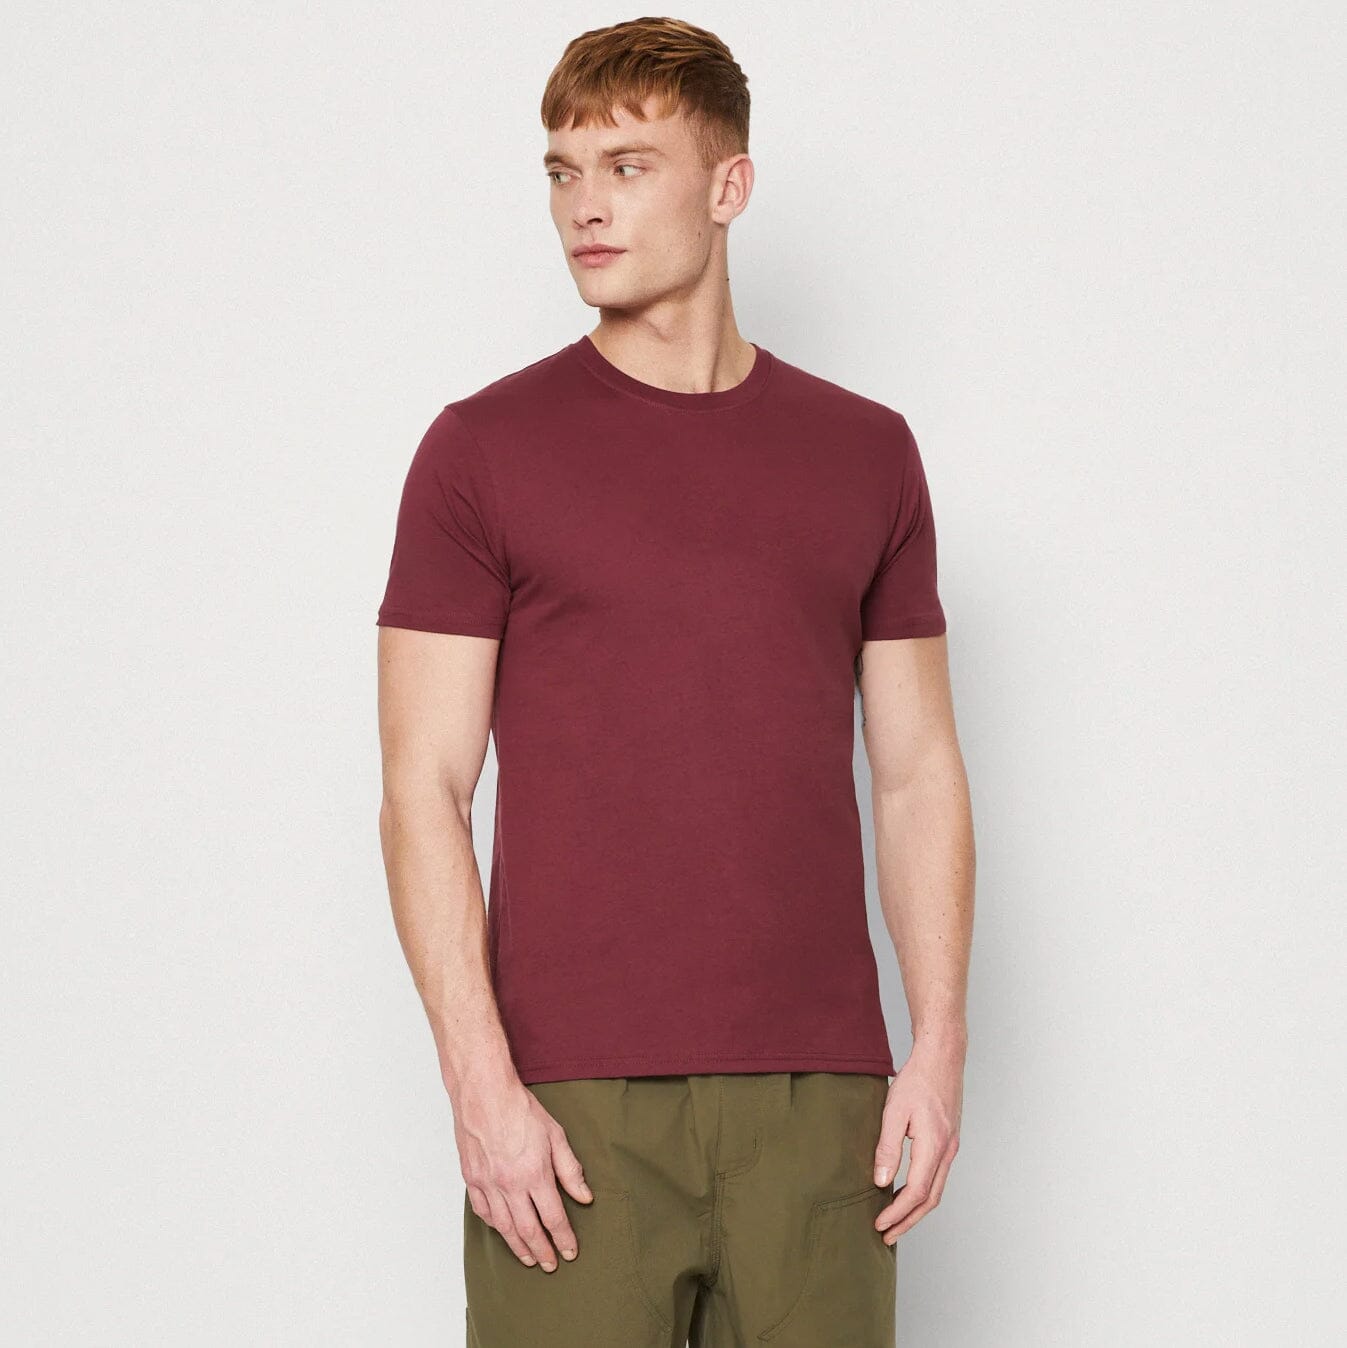 Lower East Men's Short-Sleeve Tee - 100% BCI Combed Cotton Perfection Men's Tee Shirt Image Burgundy S 